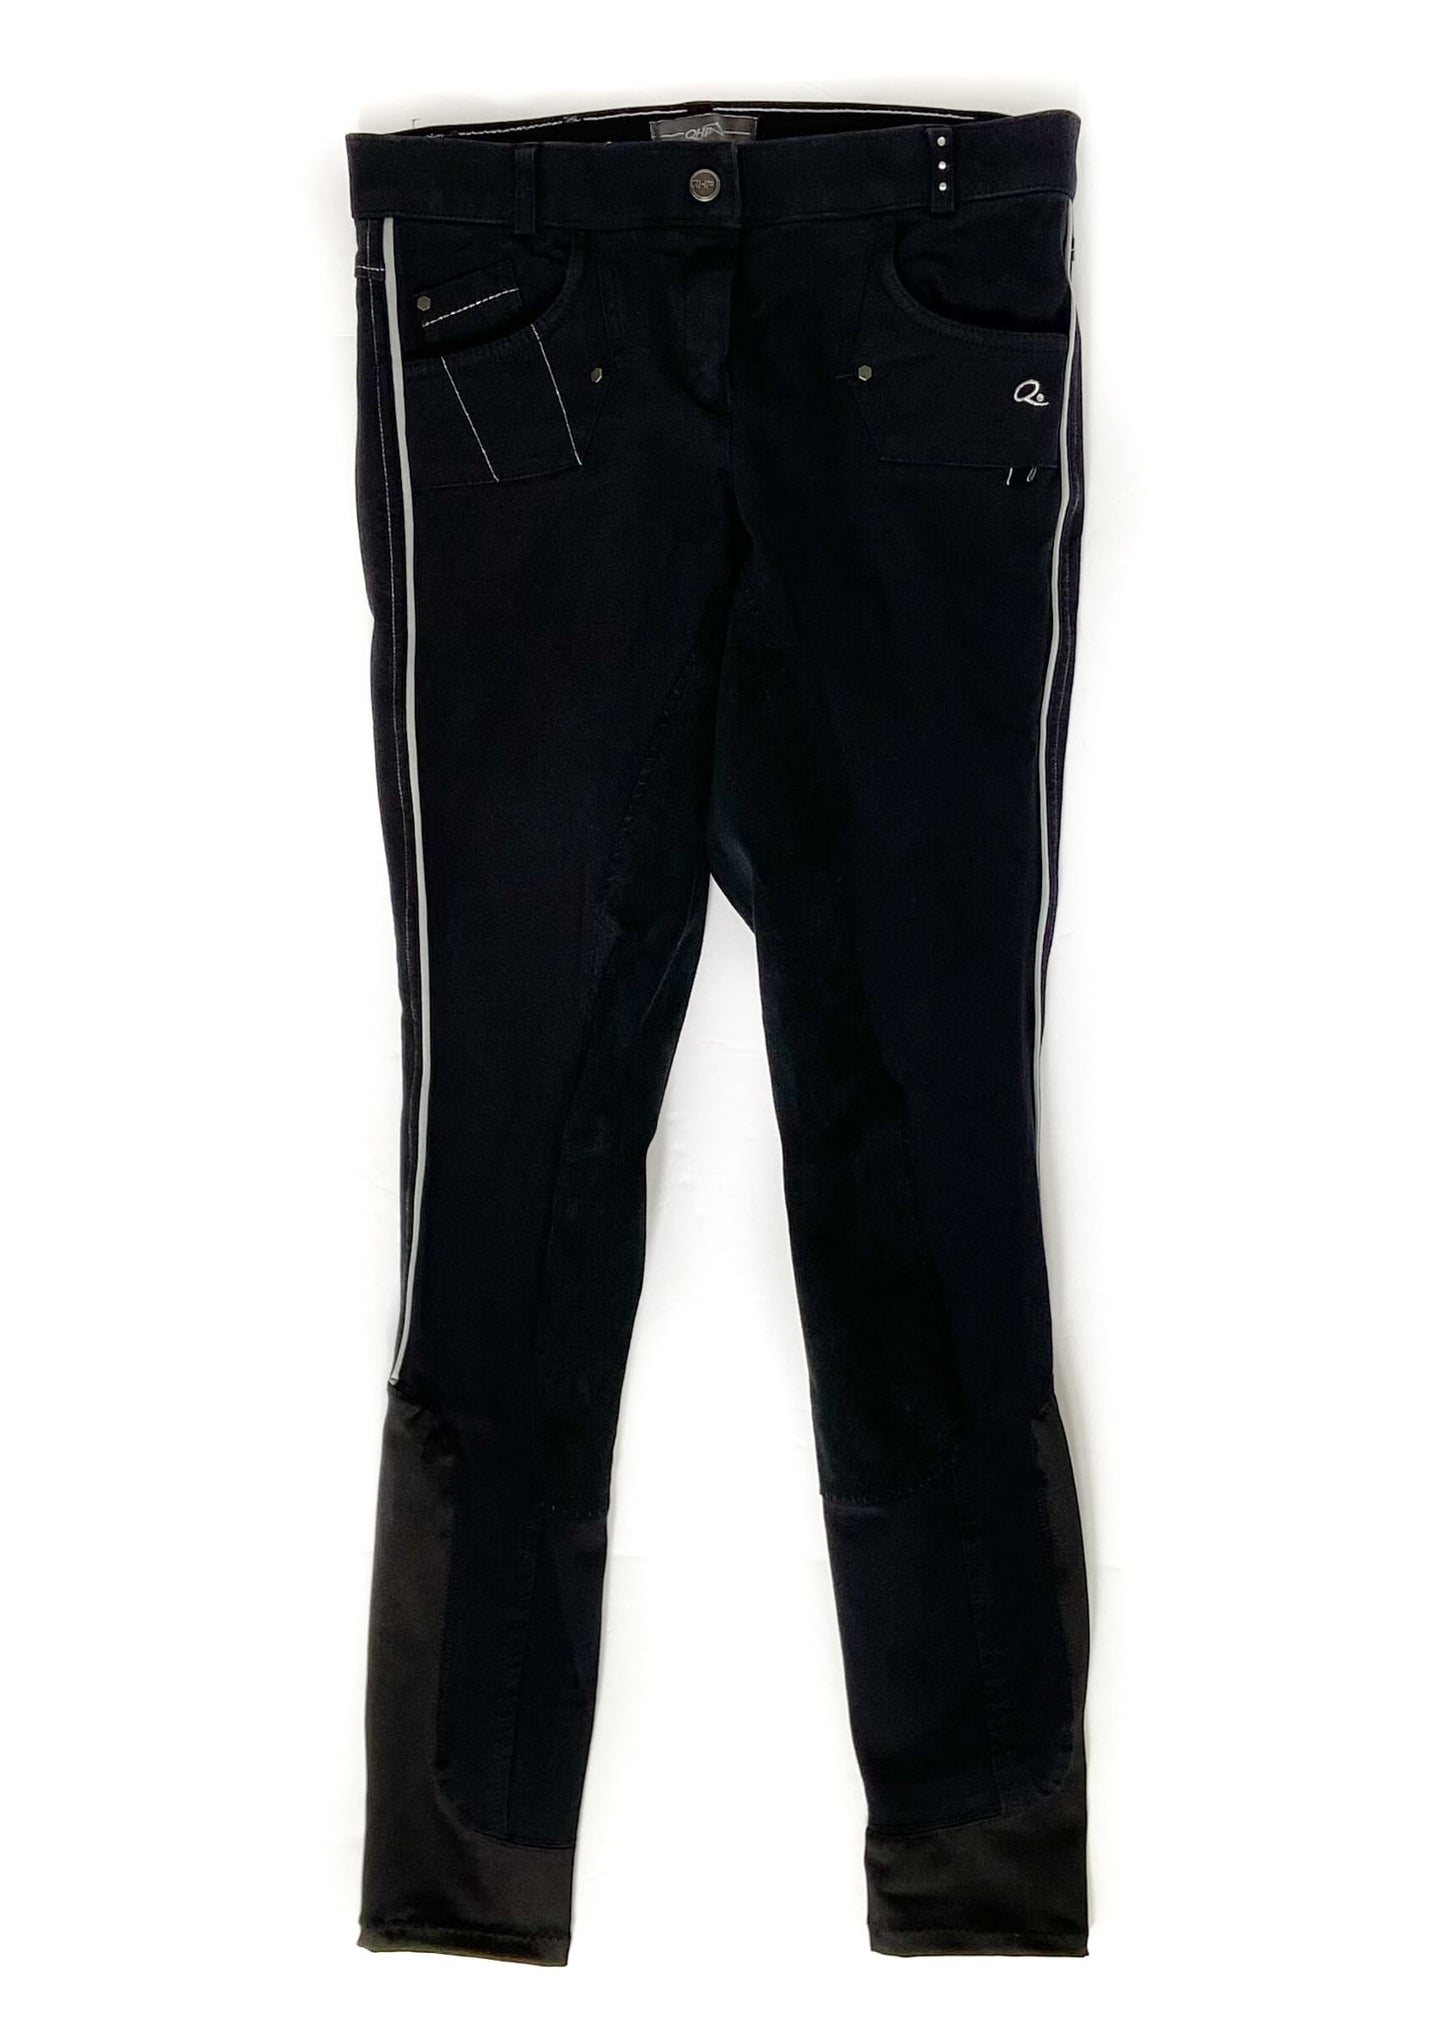 QHP Suede Full Seat Breeches - Black - Women's 28